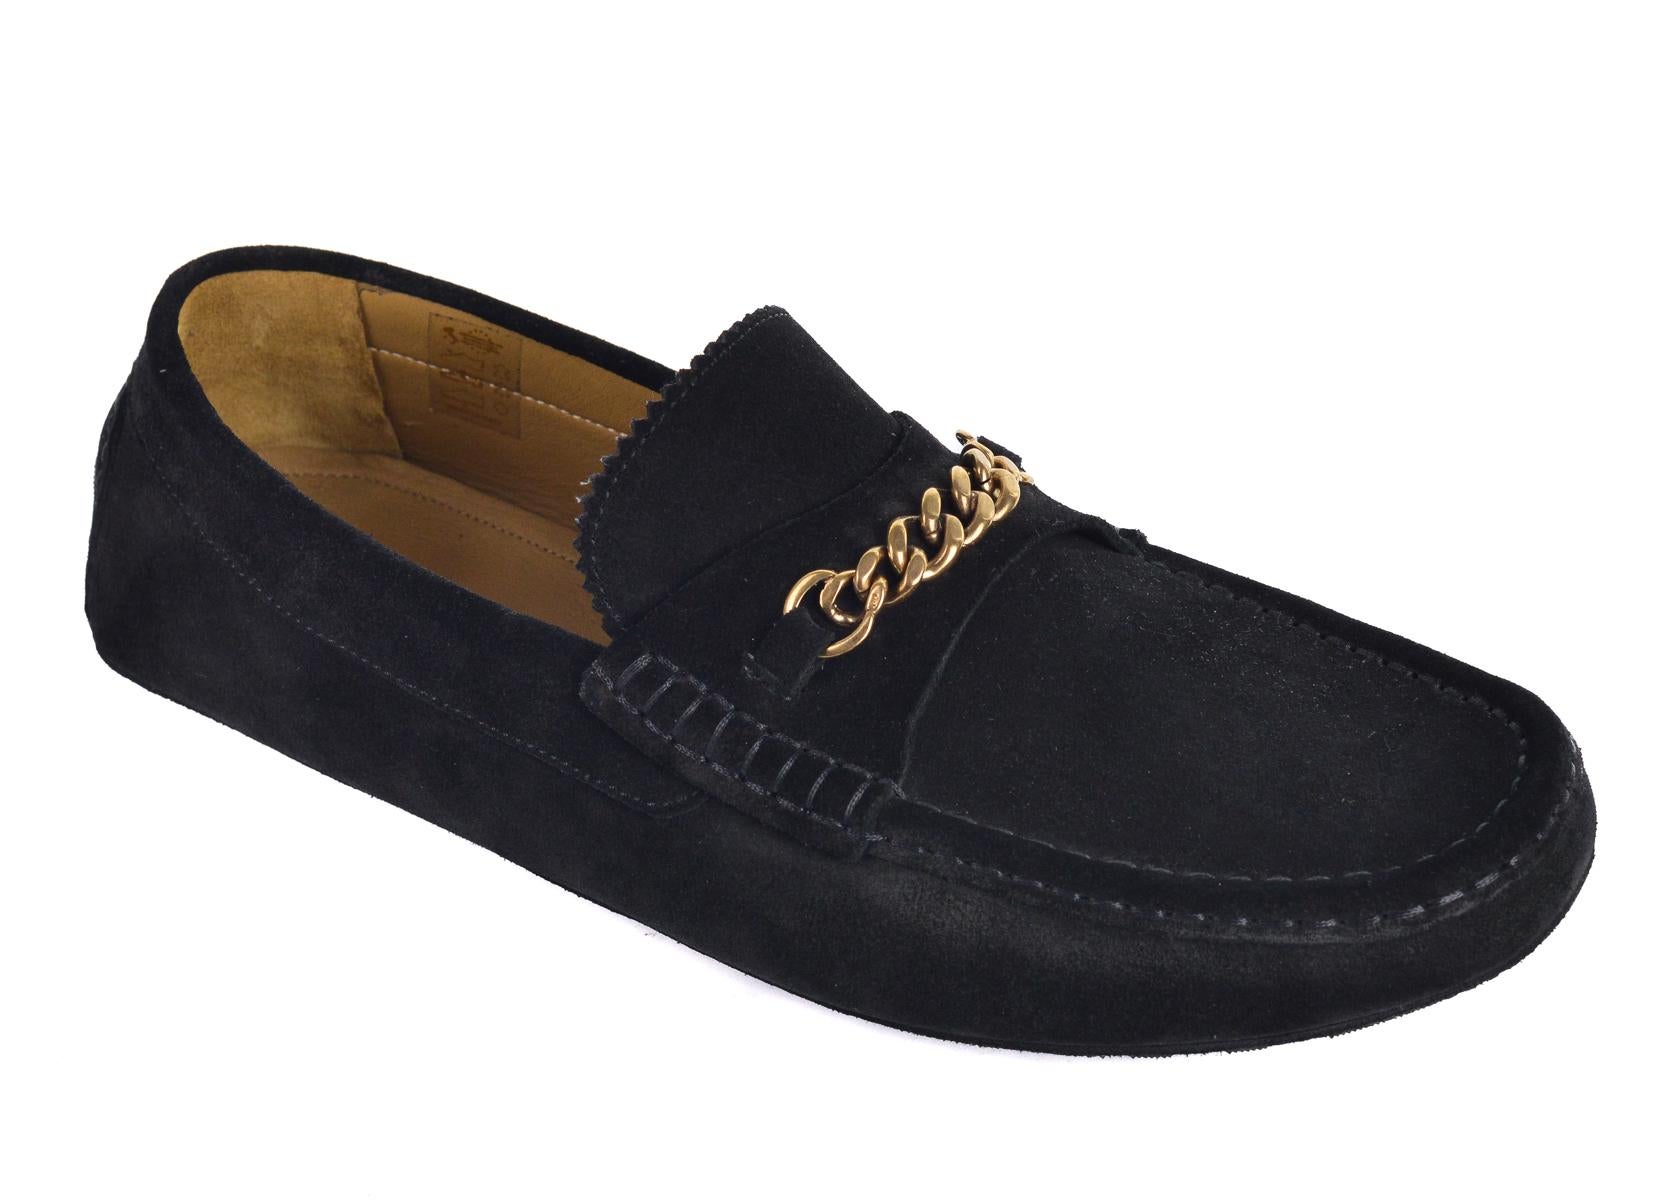 Tom Ford's york chain drivers. These Tom Ford loafers are an iconic piece and is reinvented to a driver style crafted from luxurious italian suede. Perfect pair of shoes for a sophisticated and sauve everyday look. Pair with regular denims or